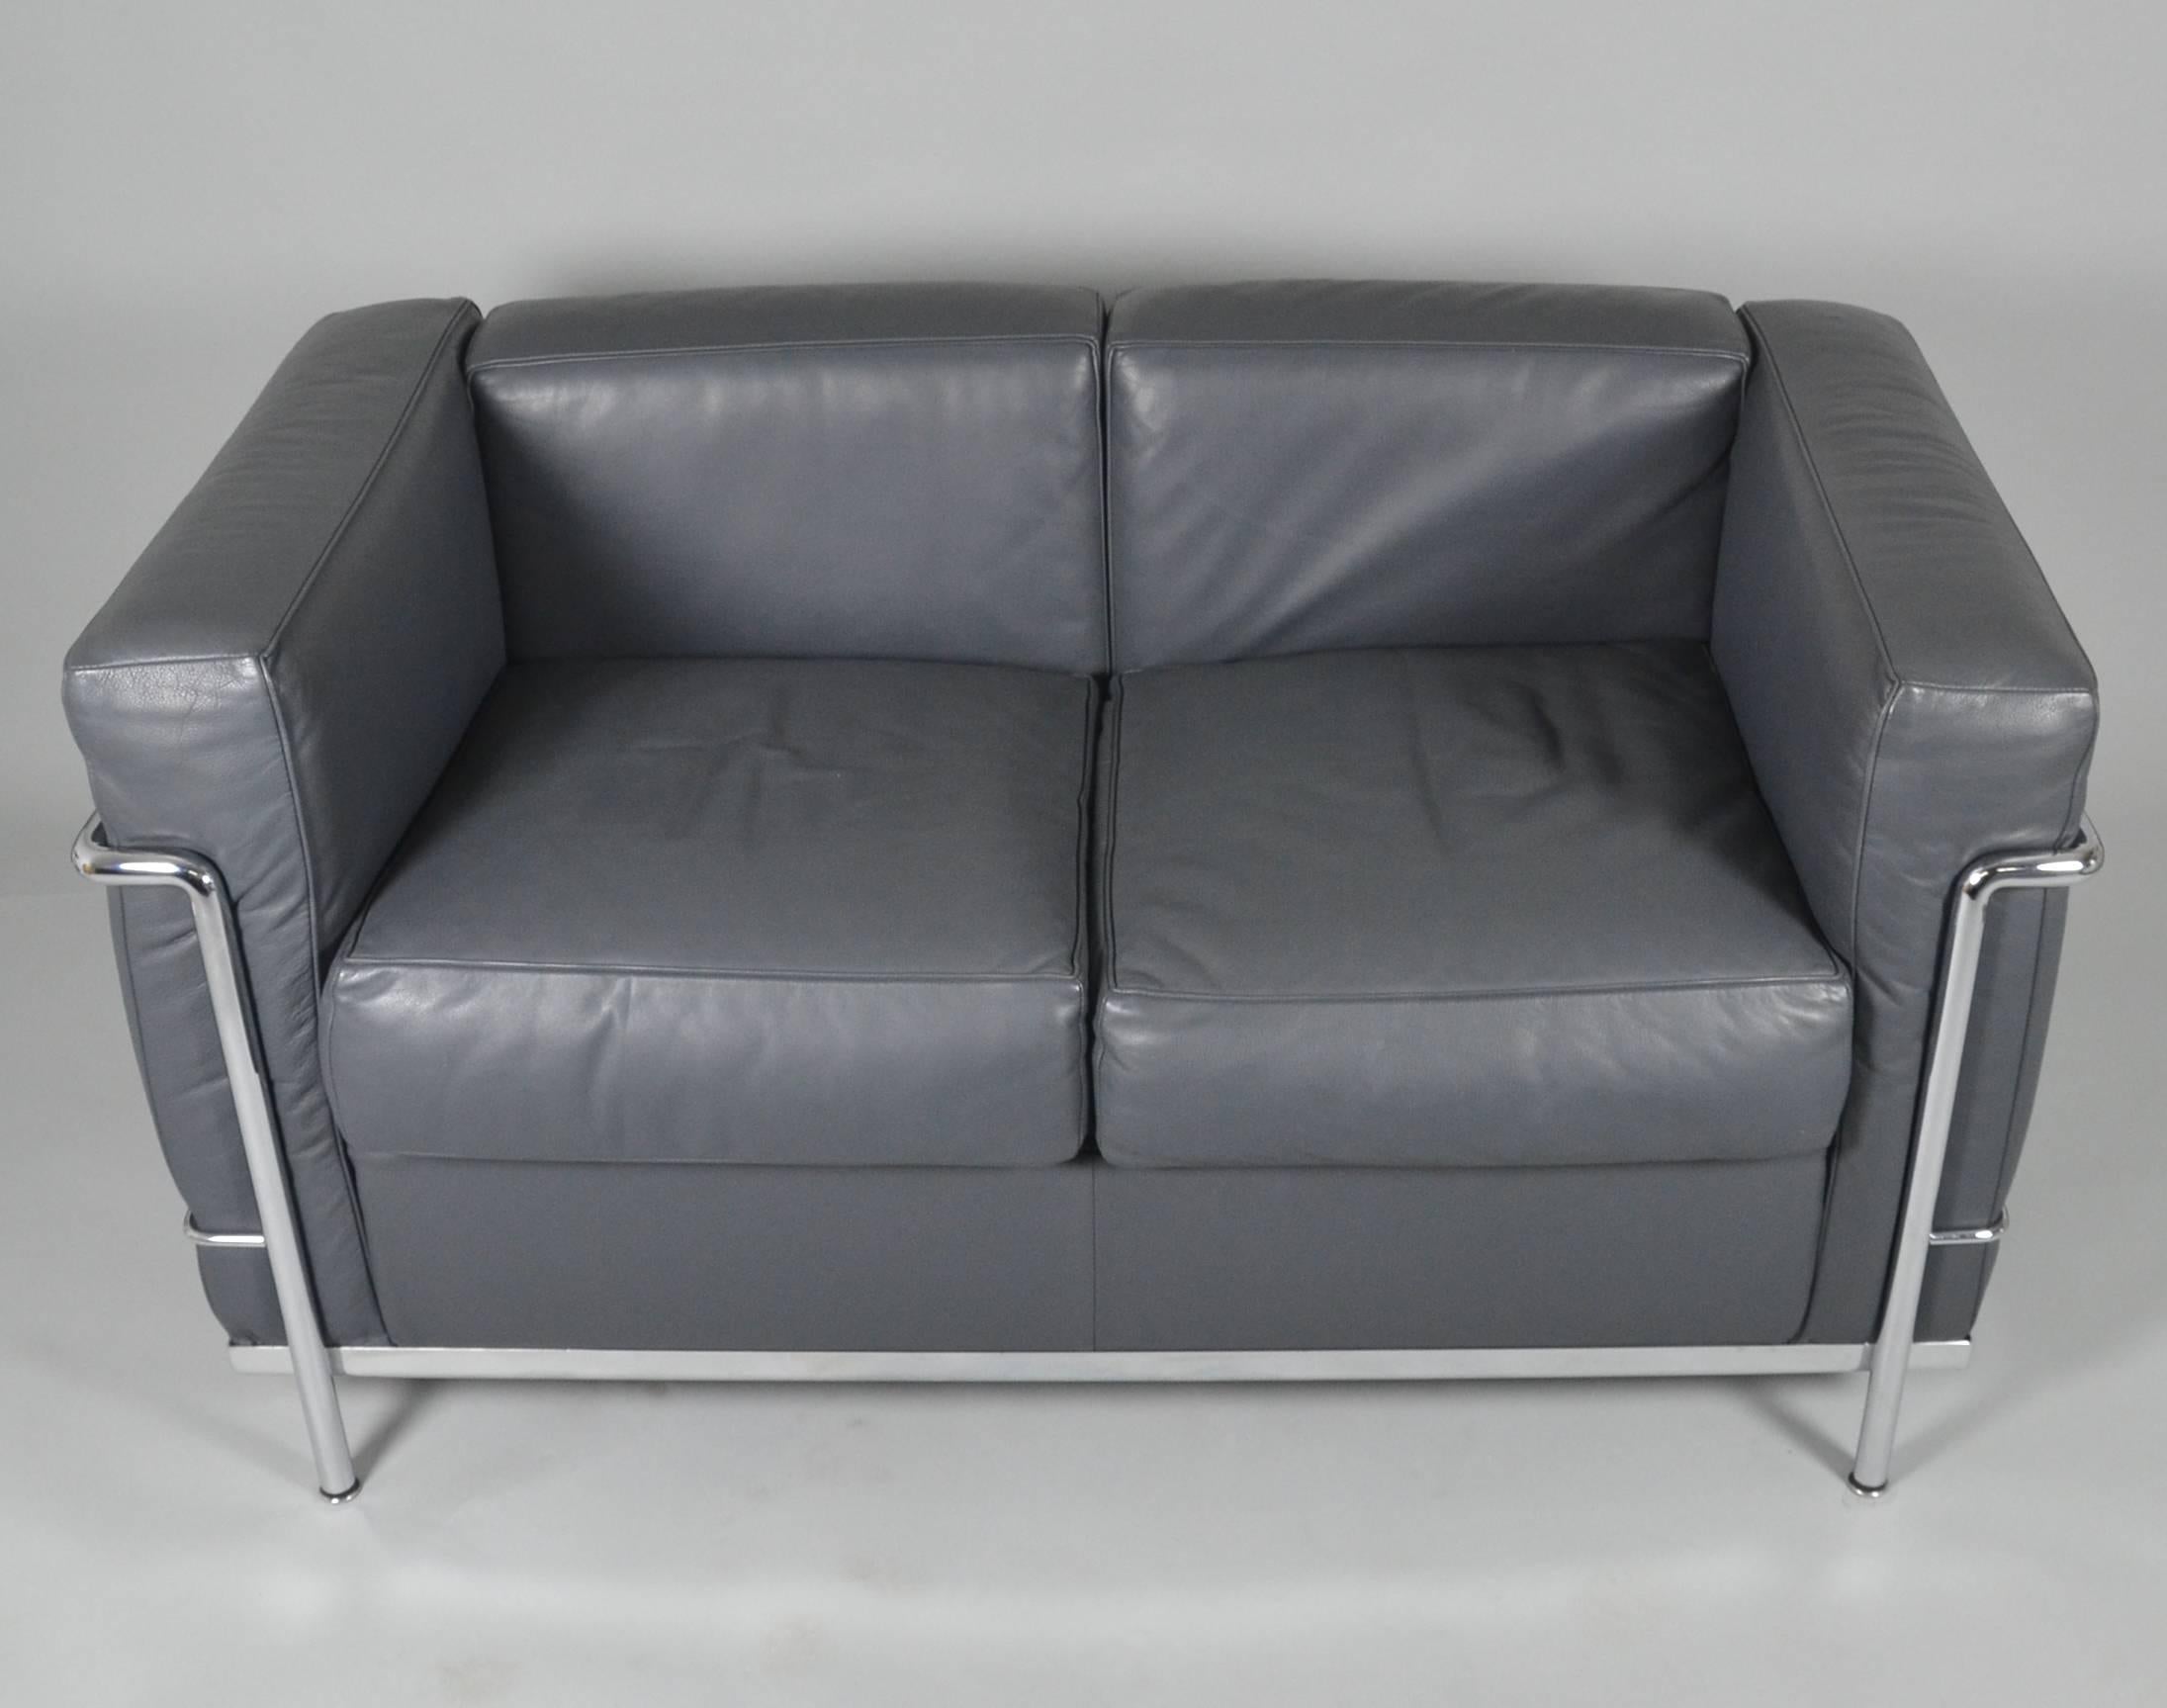 Designed by Le Corbusier, Pierre Jeanneret and Charlotte Perriand in 1928. Produced and signed by Cassina.
Stainless steel with cushions in grey leather.